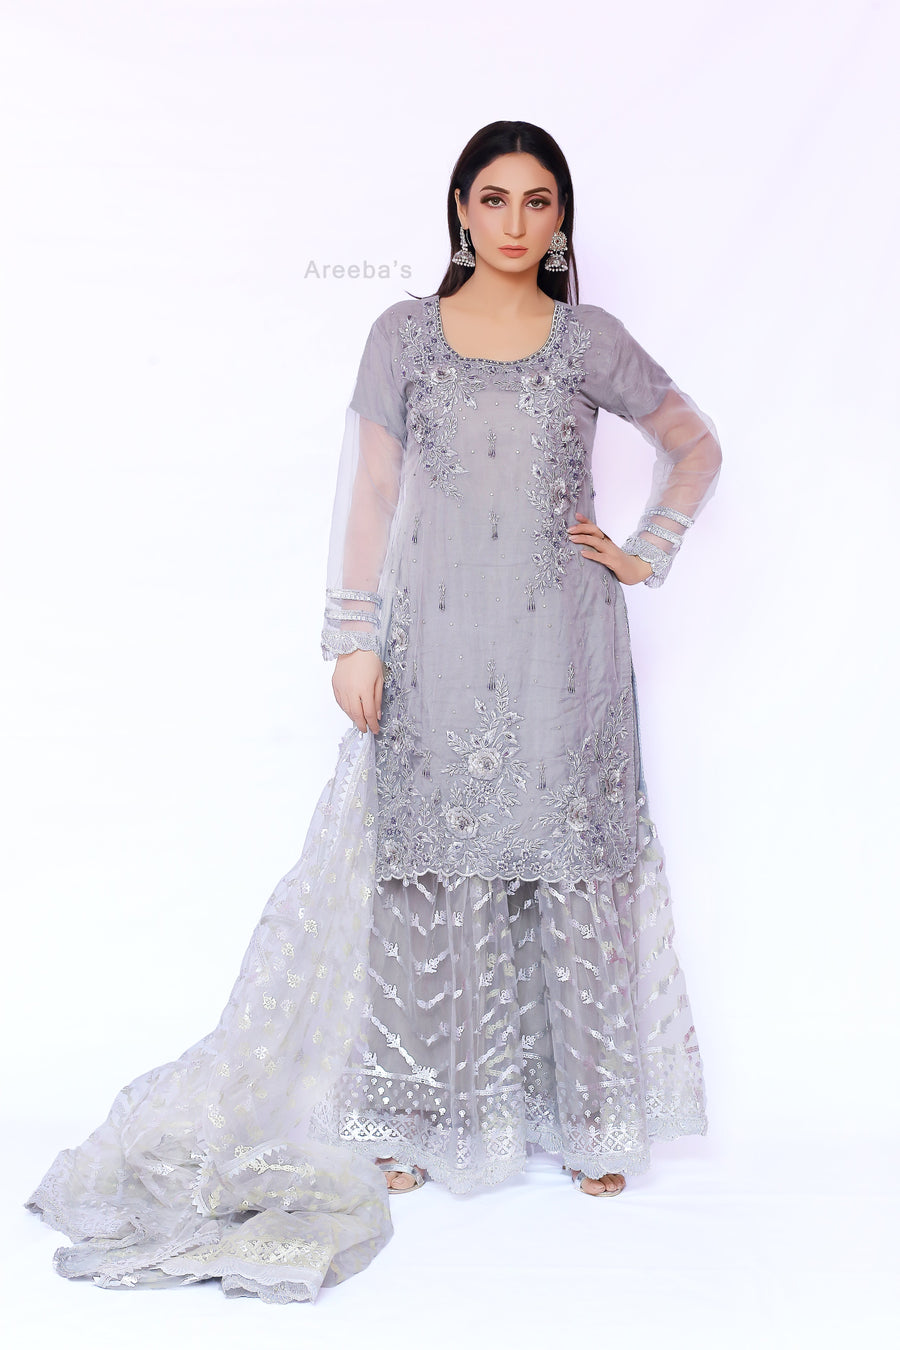 Nadia K Party suit S4- Areeba's Couture